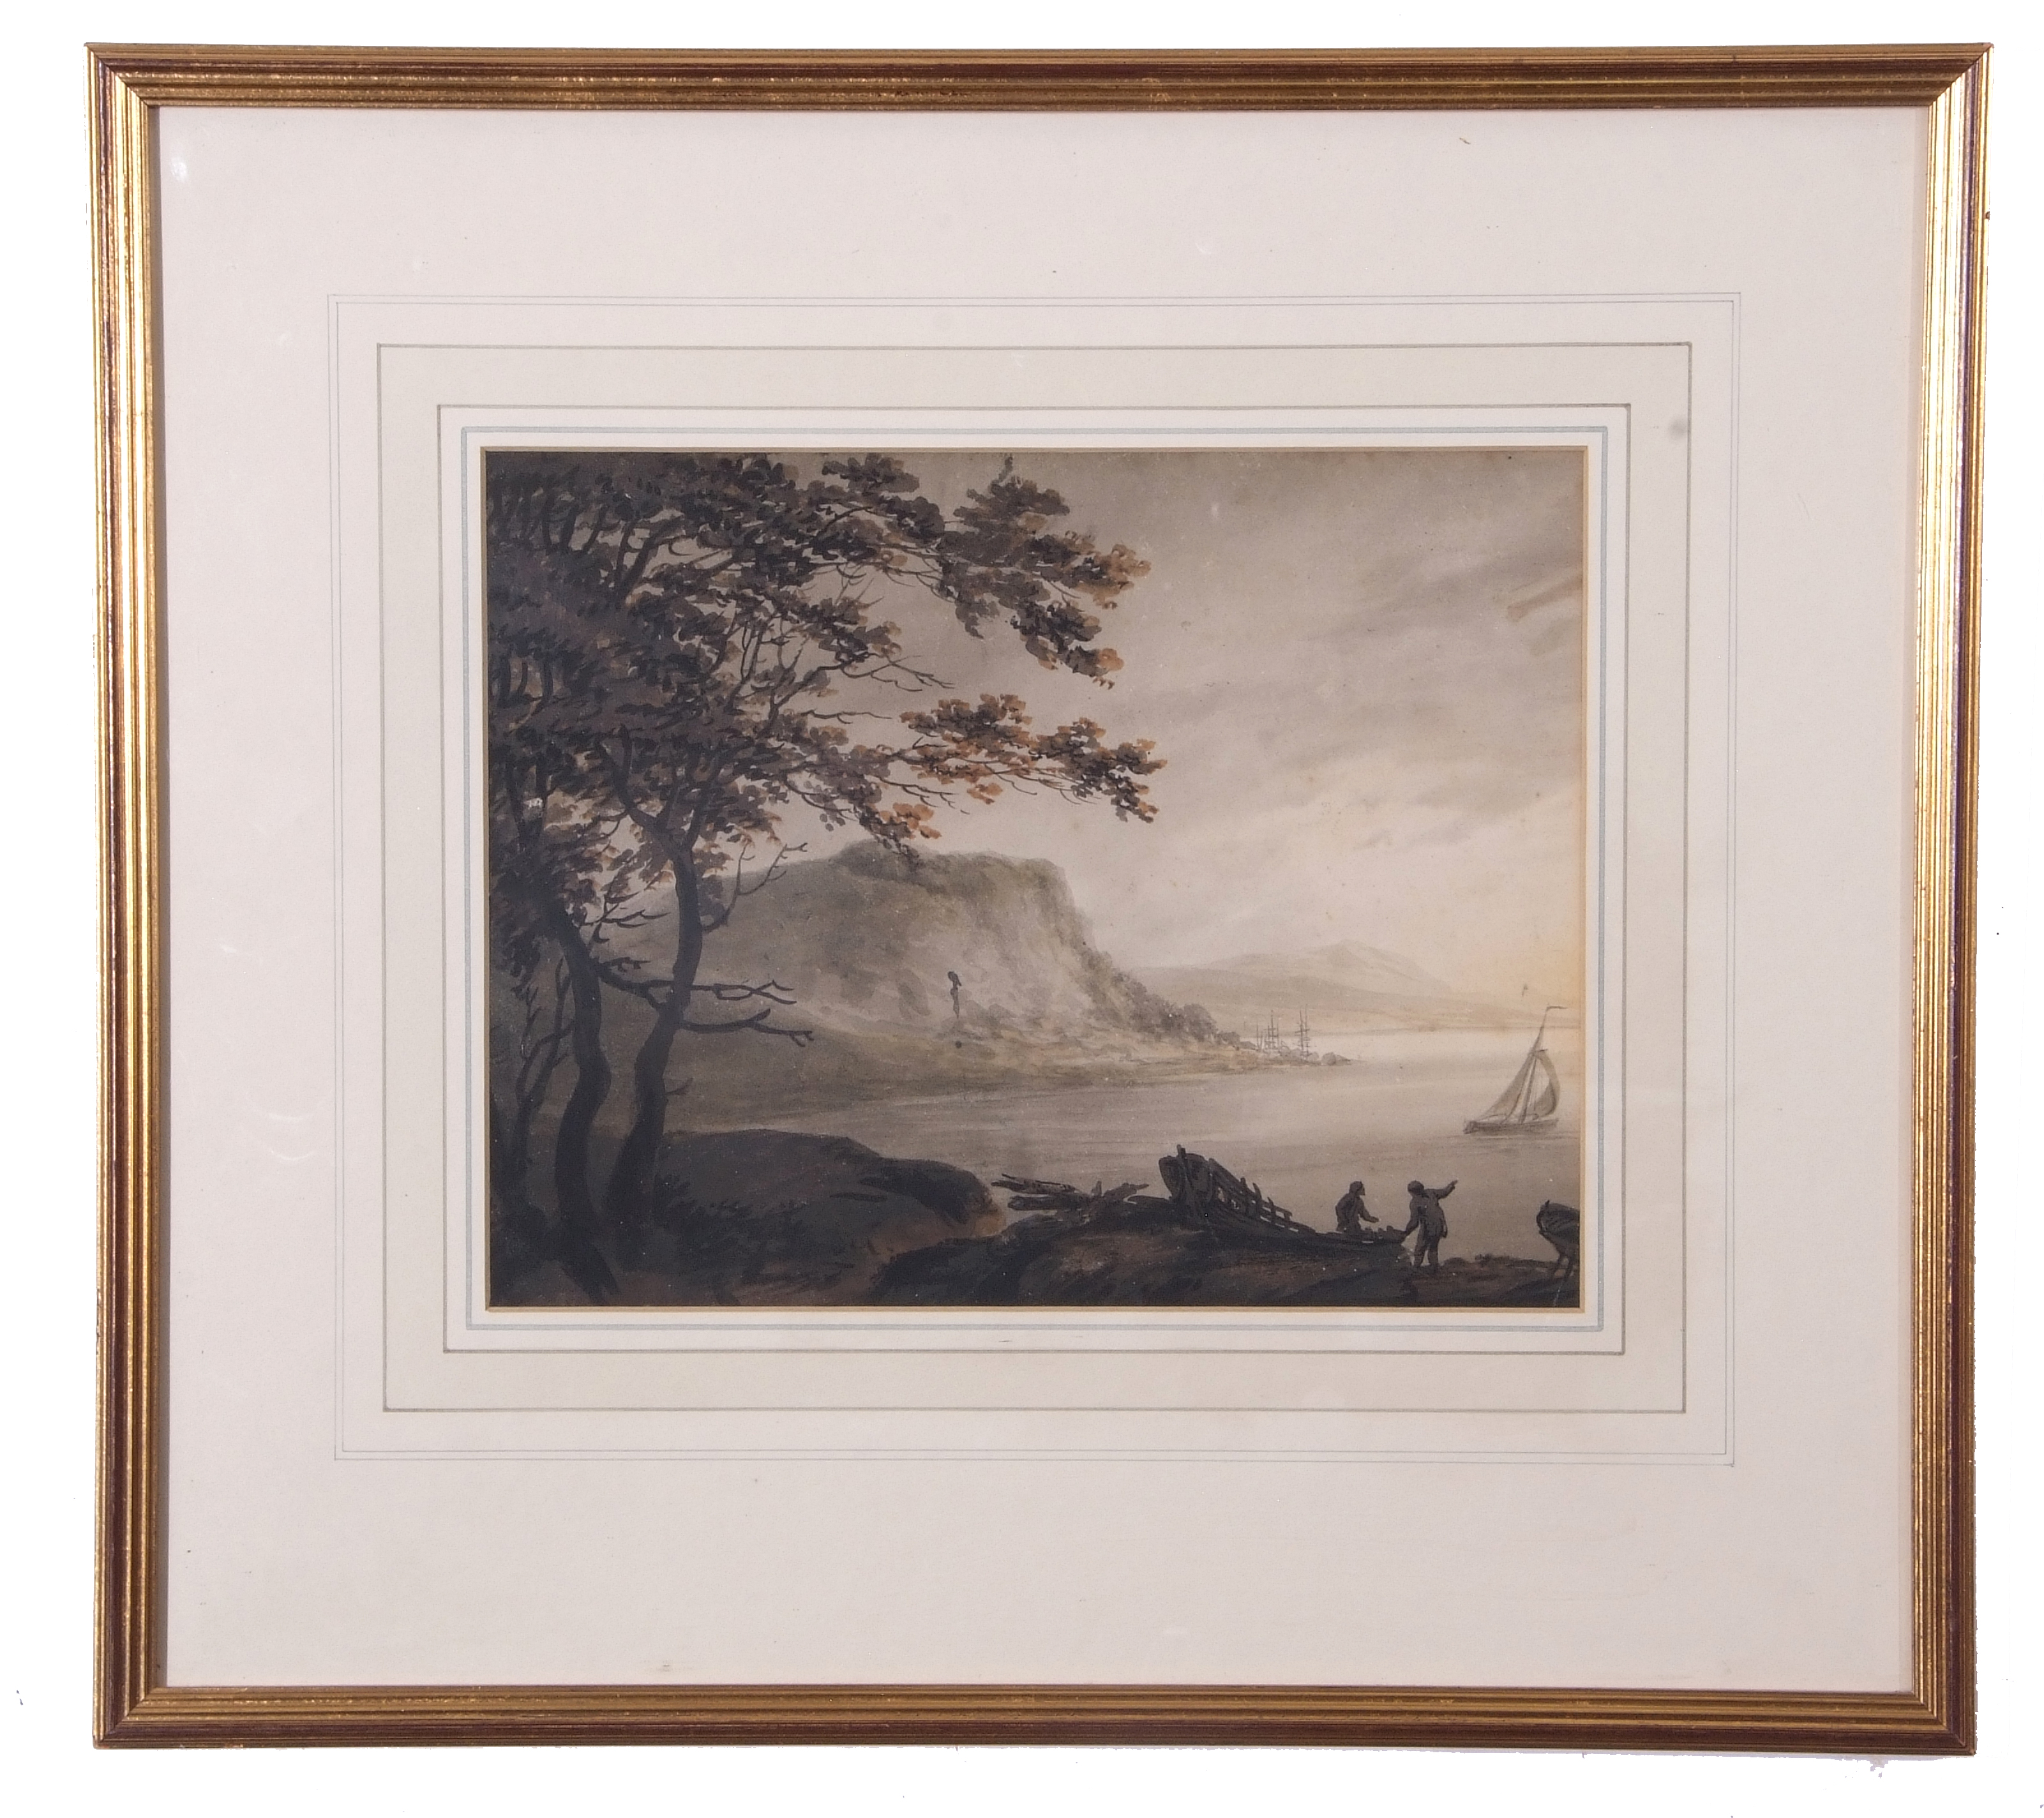 Attributed to William Payne (British, late 18th Century) A coastal scene , watercolour, 8 x 11ins